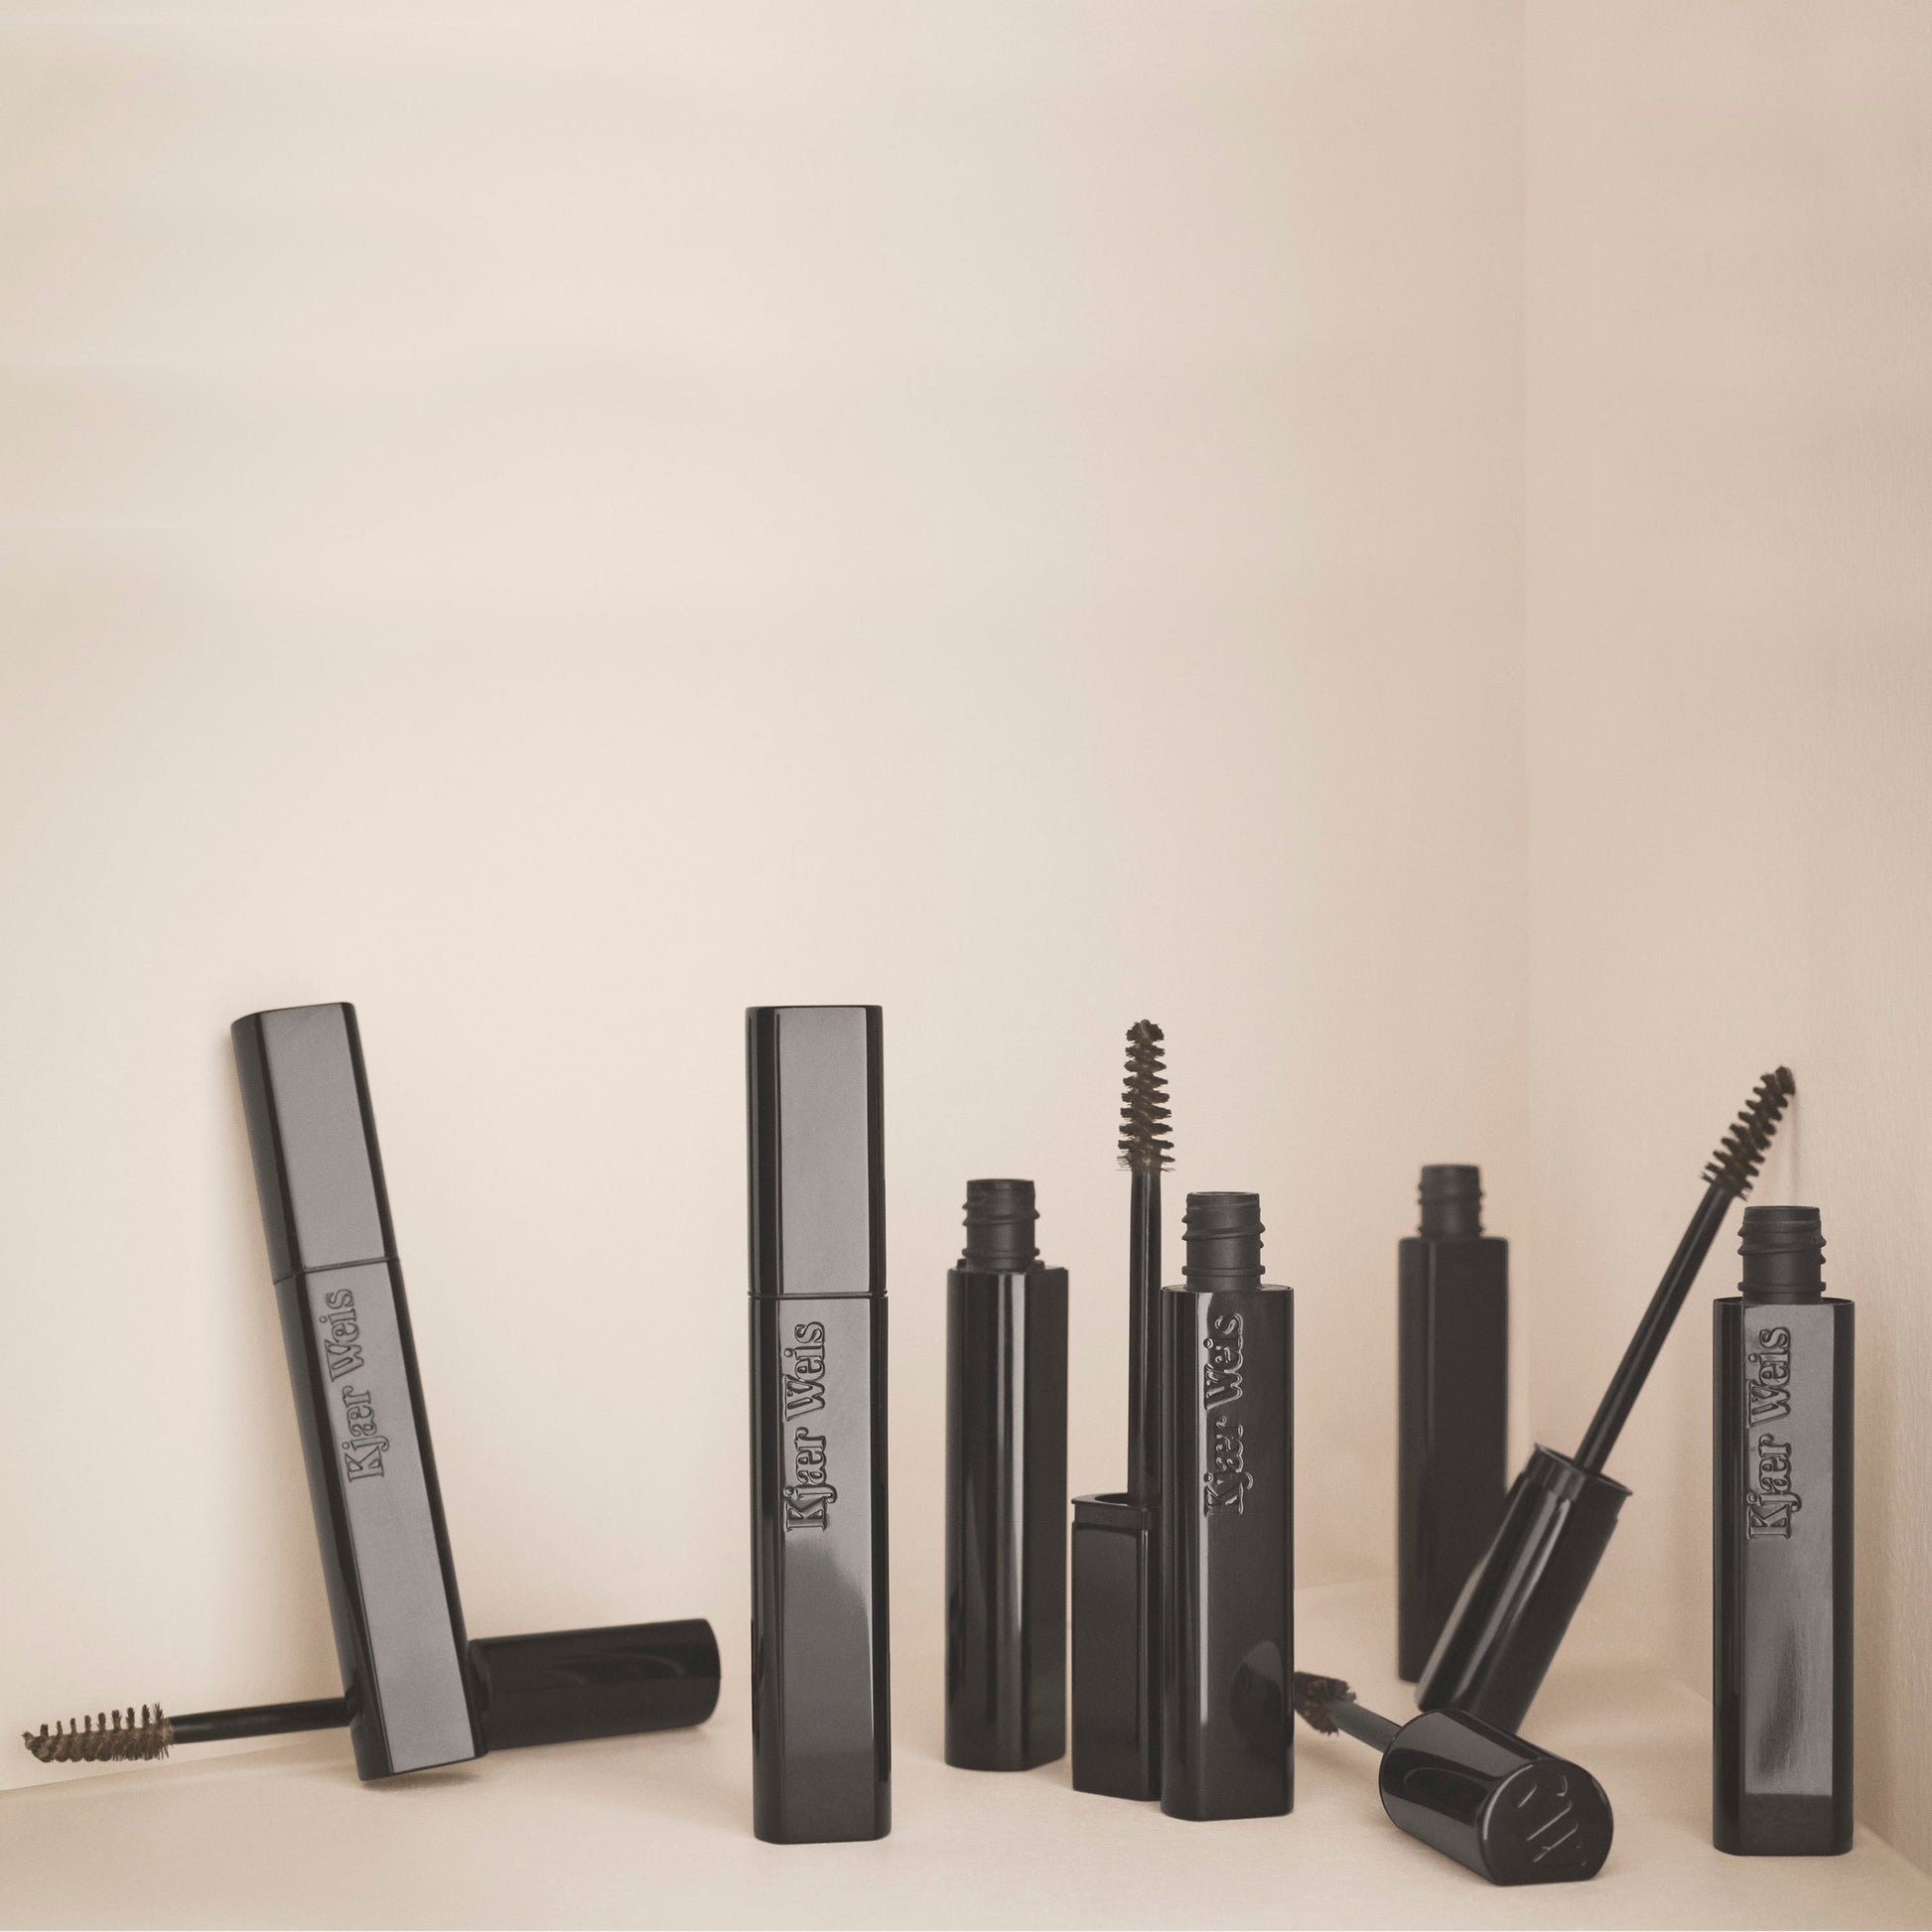 various kjaer weis brow gel wands and cases in glossy black material against a beige background